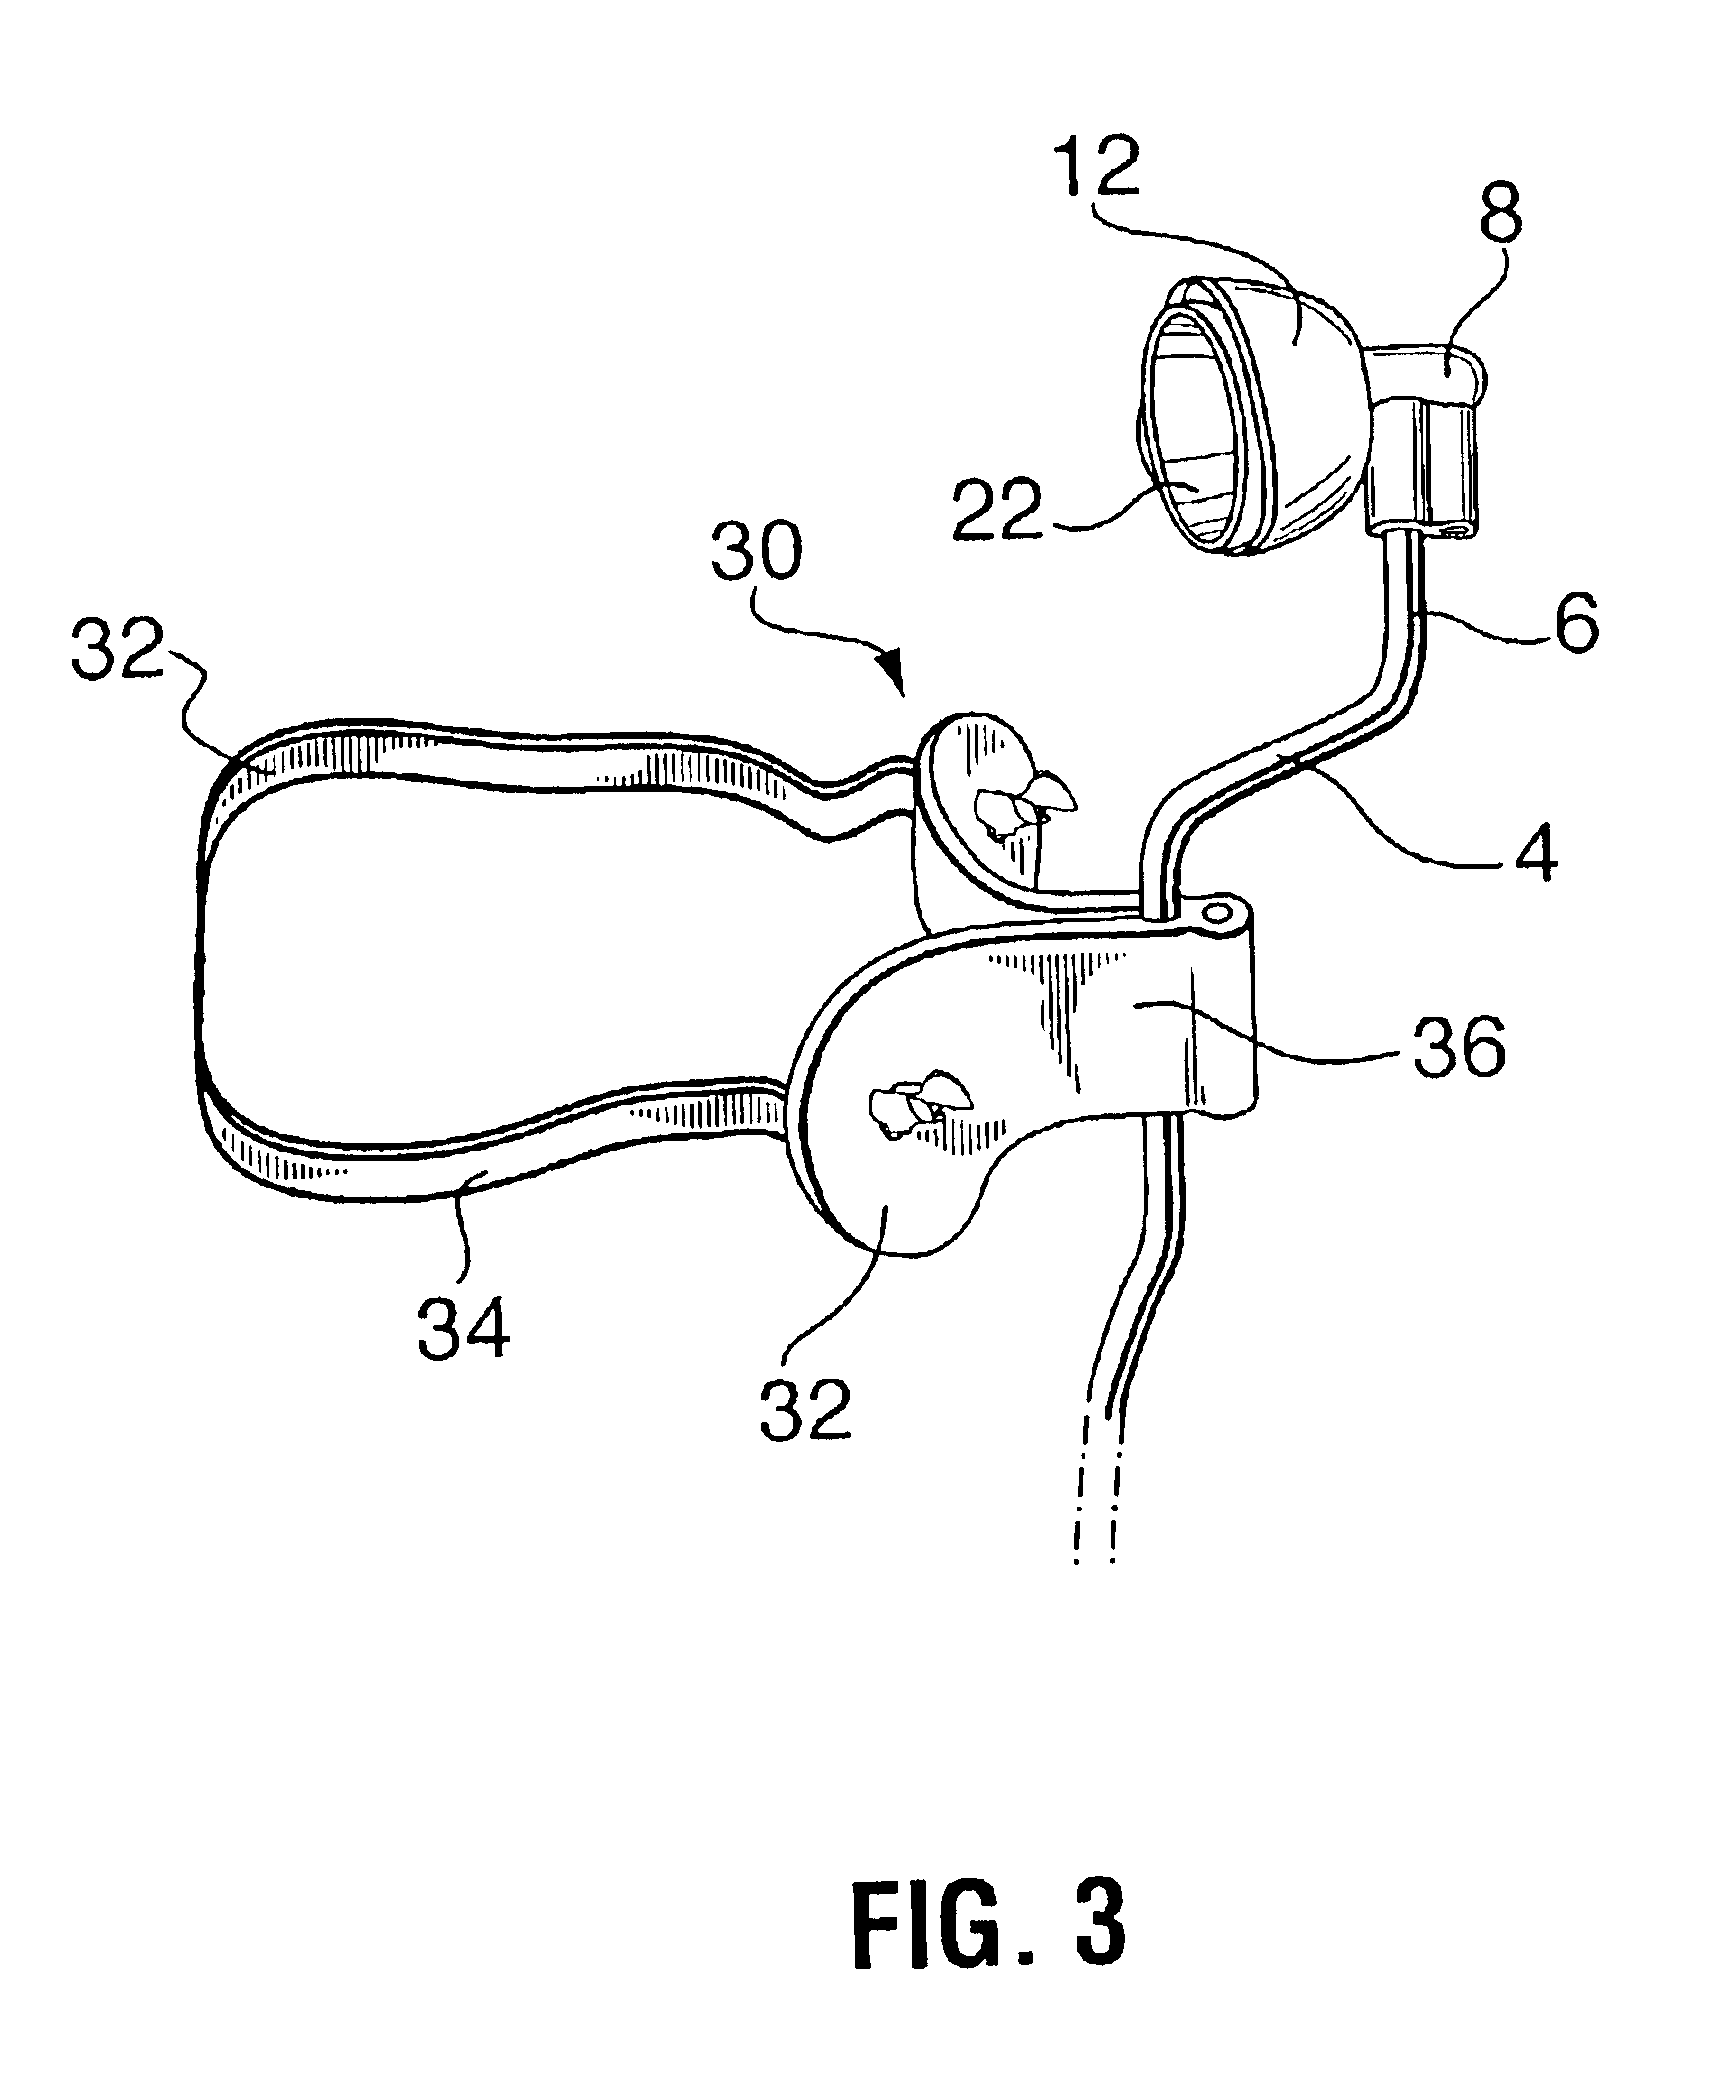 Lightweight oxygen delivery device for patients